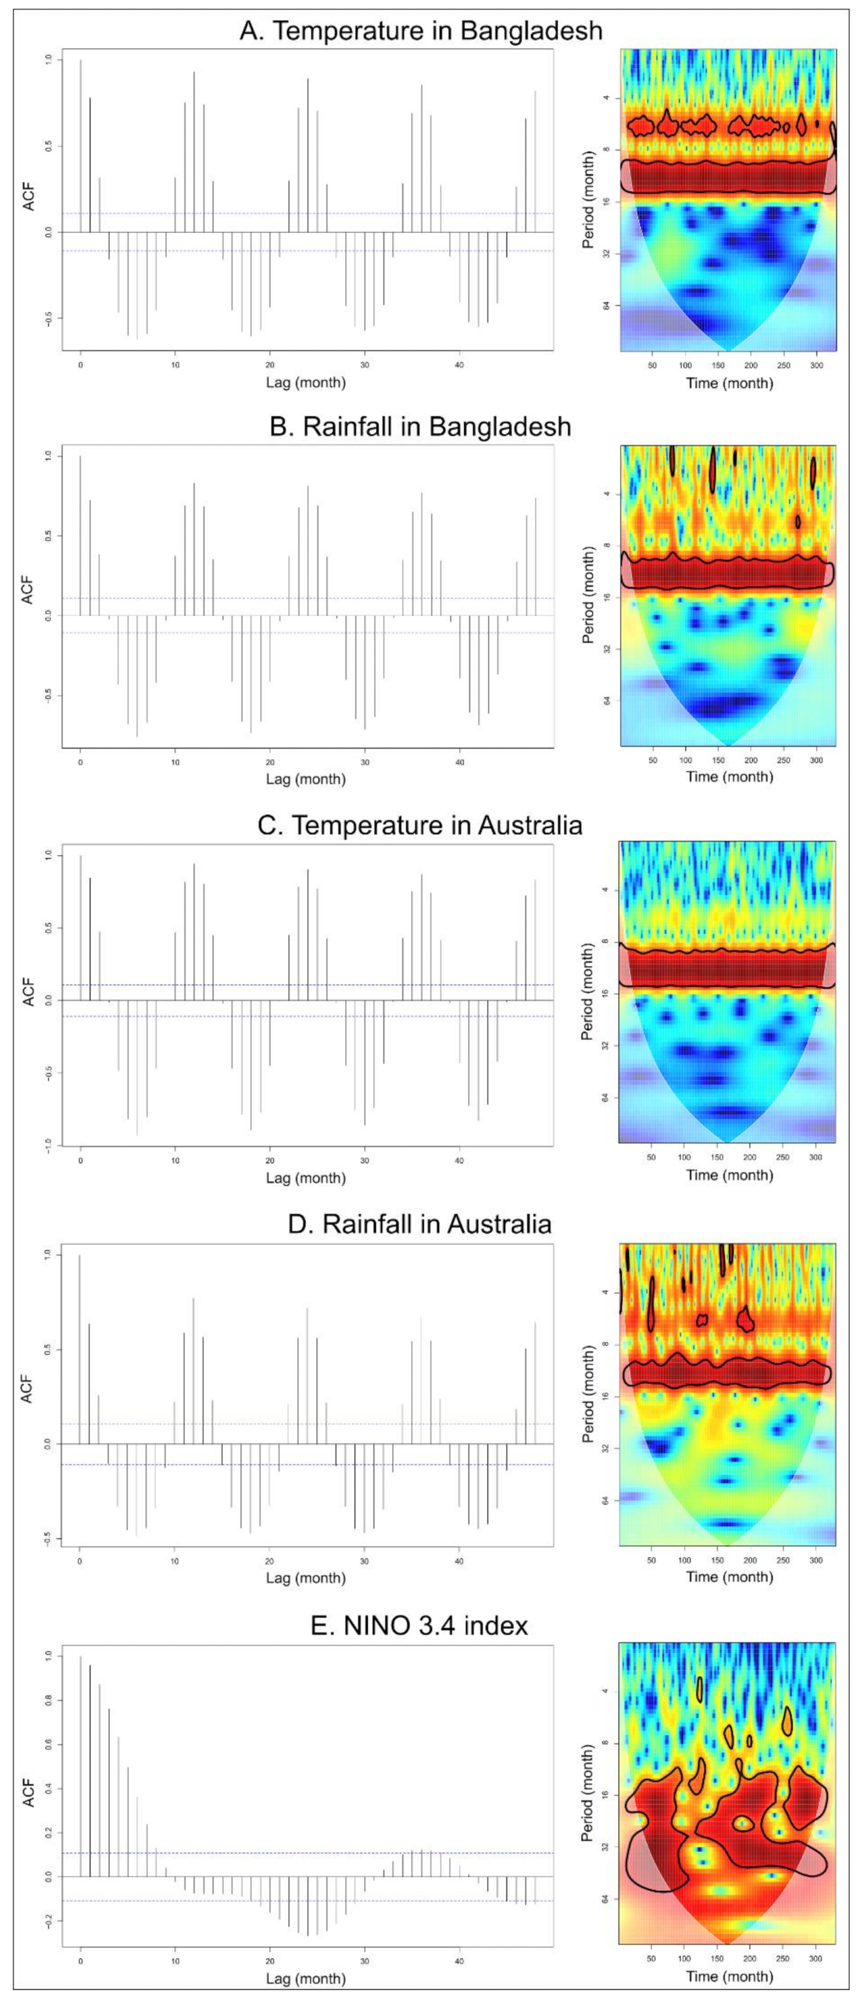 Time series and residual autocorrelation function (ACF) with significant autocorrelation values ​​in dashed lines (left column) and wavelet power spectrum (right column) from January 1993 to June 2020 (330 months) from (A) monthly temperature in Bangladesh, (B) monthly precipitation in Bangladesh, (C) monthly temperature in Australia, (D) monthly precipitation in Australia and (E) NINO 3.4 index values ​​decomposed into smooth trend and seasonal effect.  The wavelet power values ​​have changed from blue to red and the black contour lines indicate a significance level of 5%.